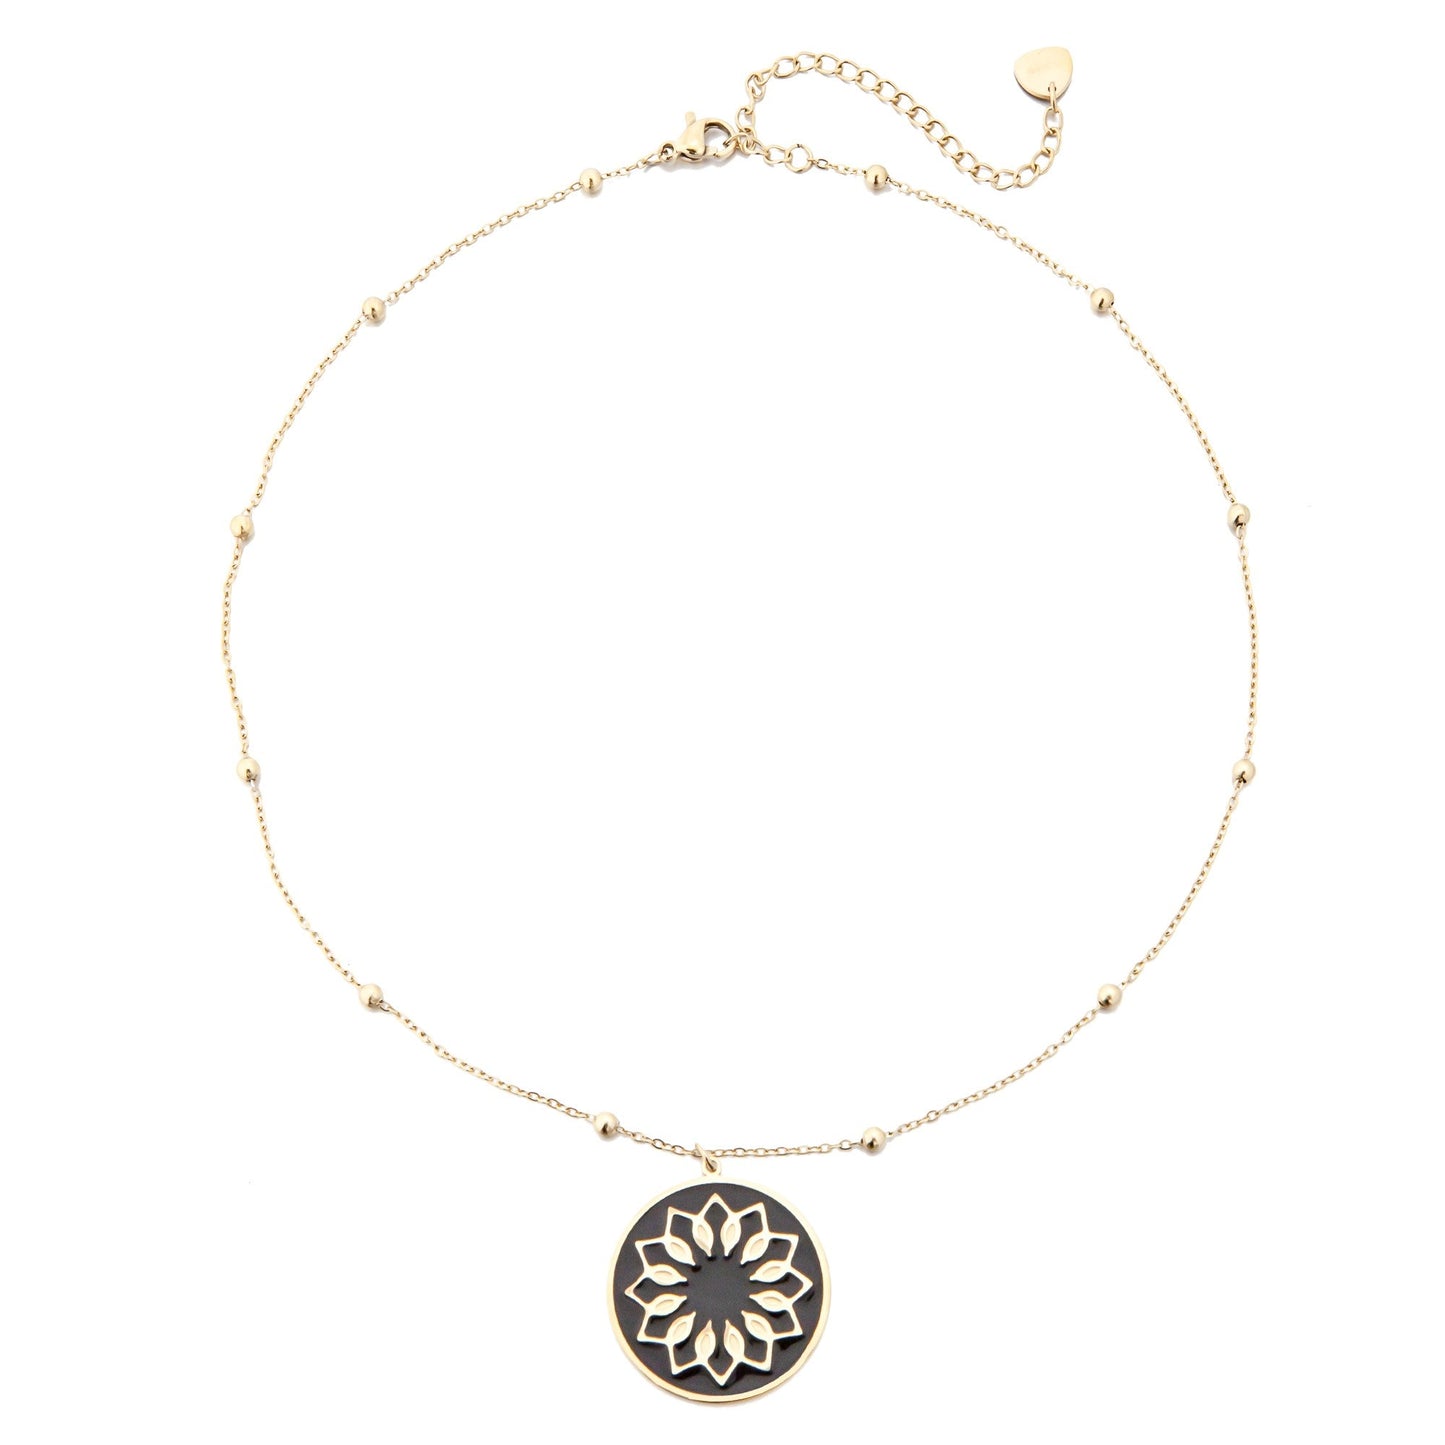 14k Gold Plated Chain Necklace with Flower Pendant and Beads